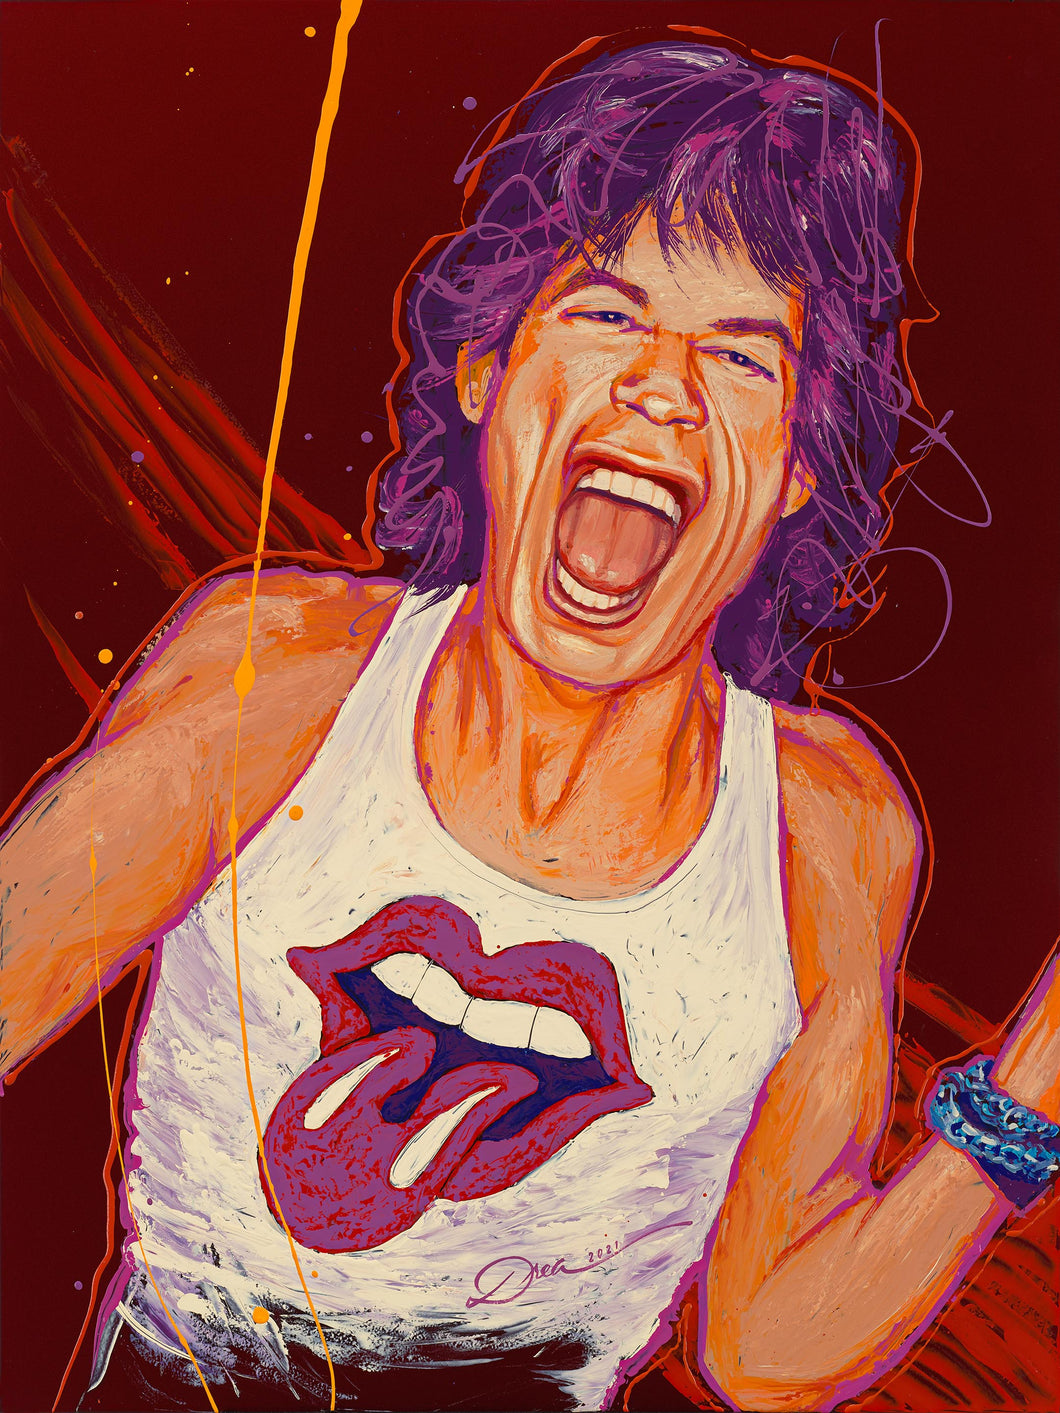 MICK JAGGER - IT'S ONLY ROCK AND ROLL